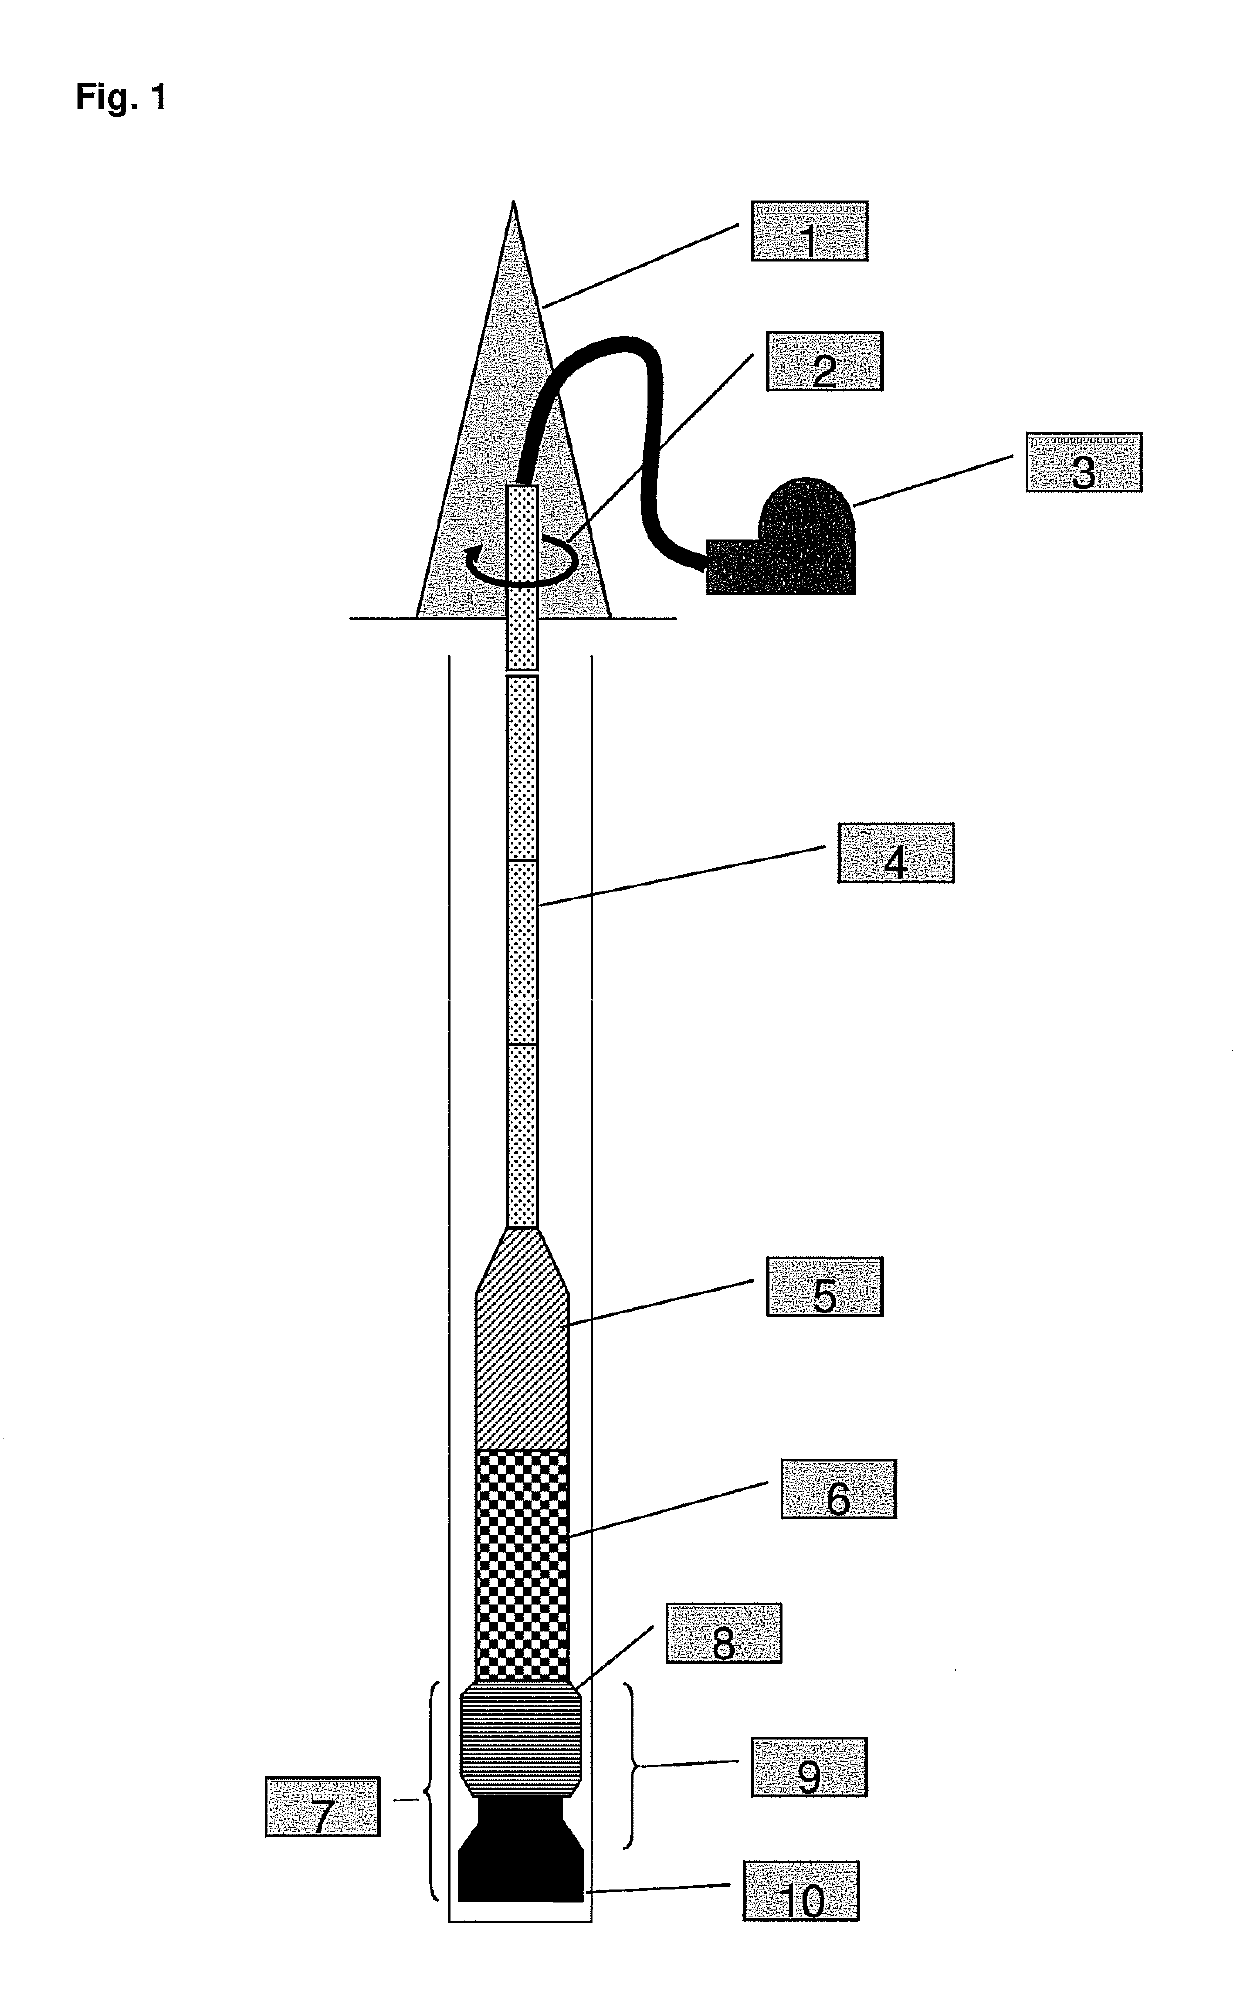 System for rotary drilling by electrical discharge